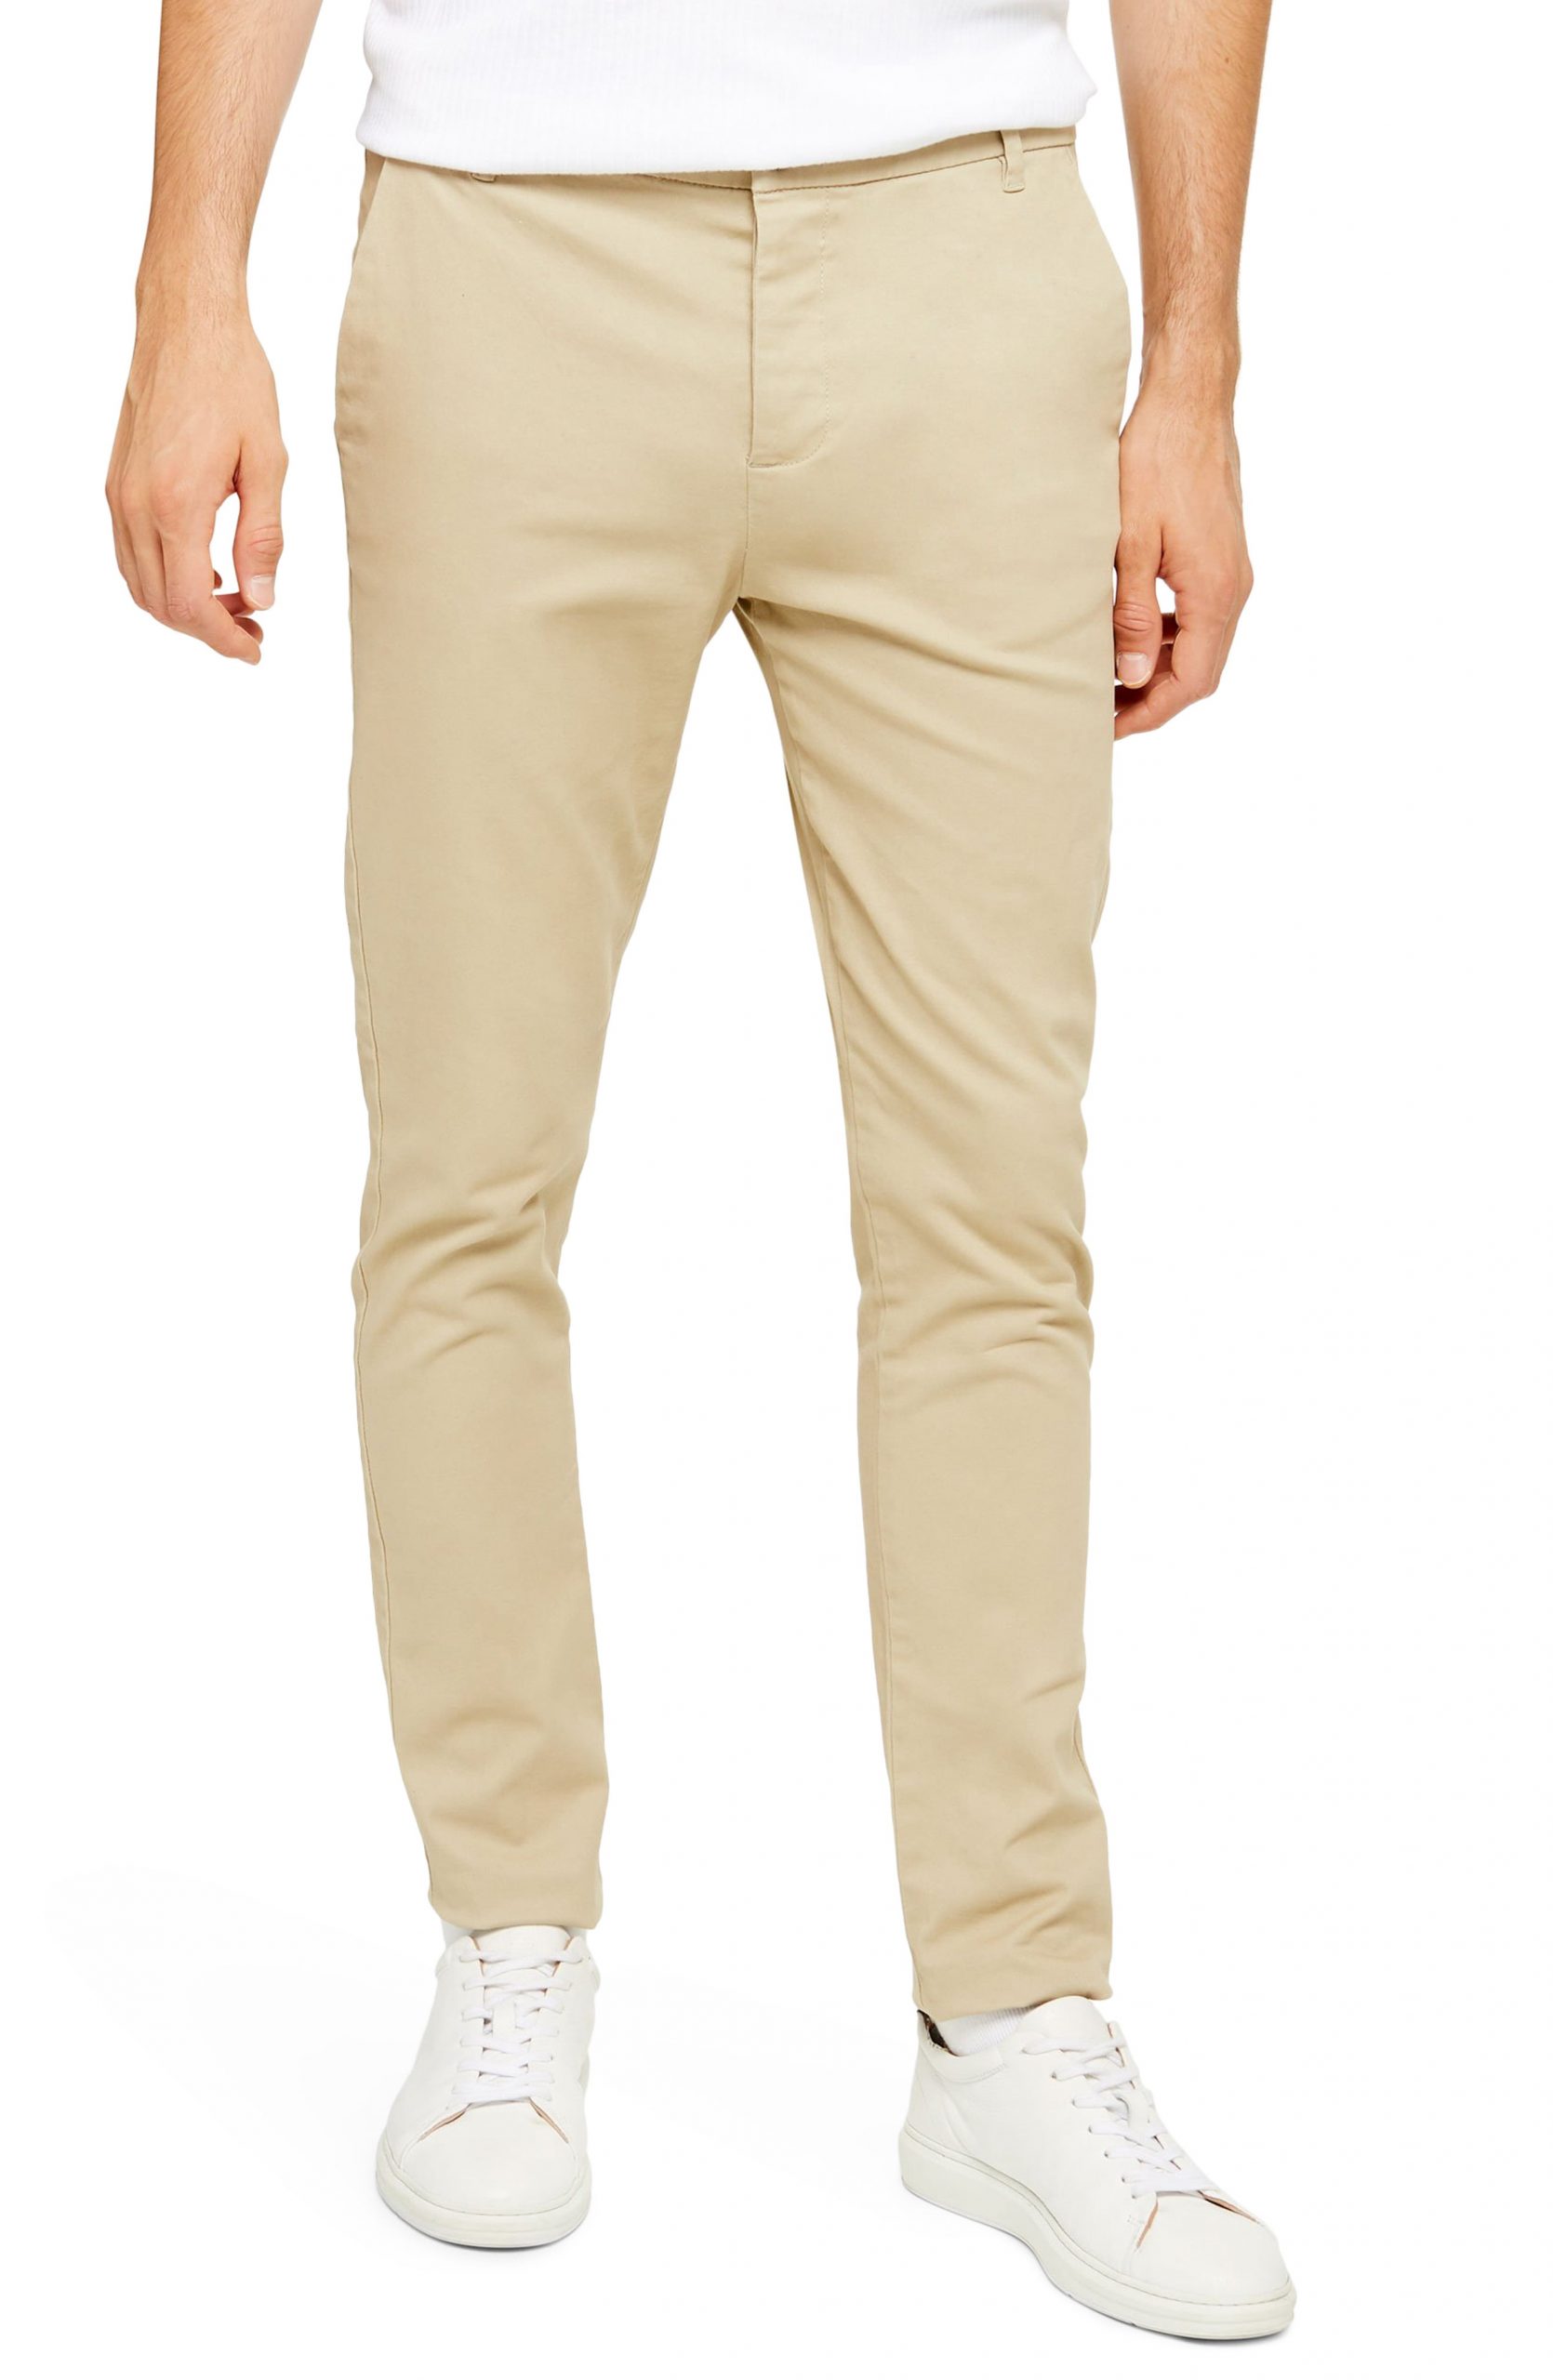 Men’s Topman Stretch Skinny Fit Chinos, Size 34 x 34 - Beige | The ...